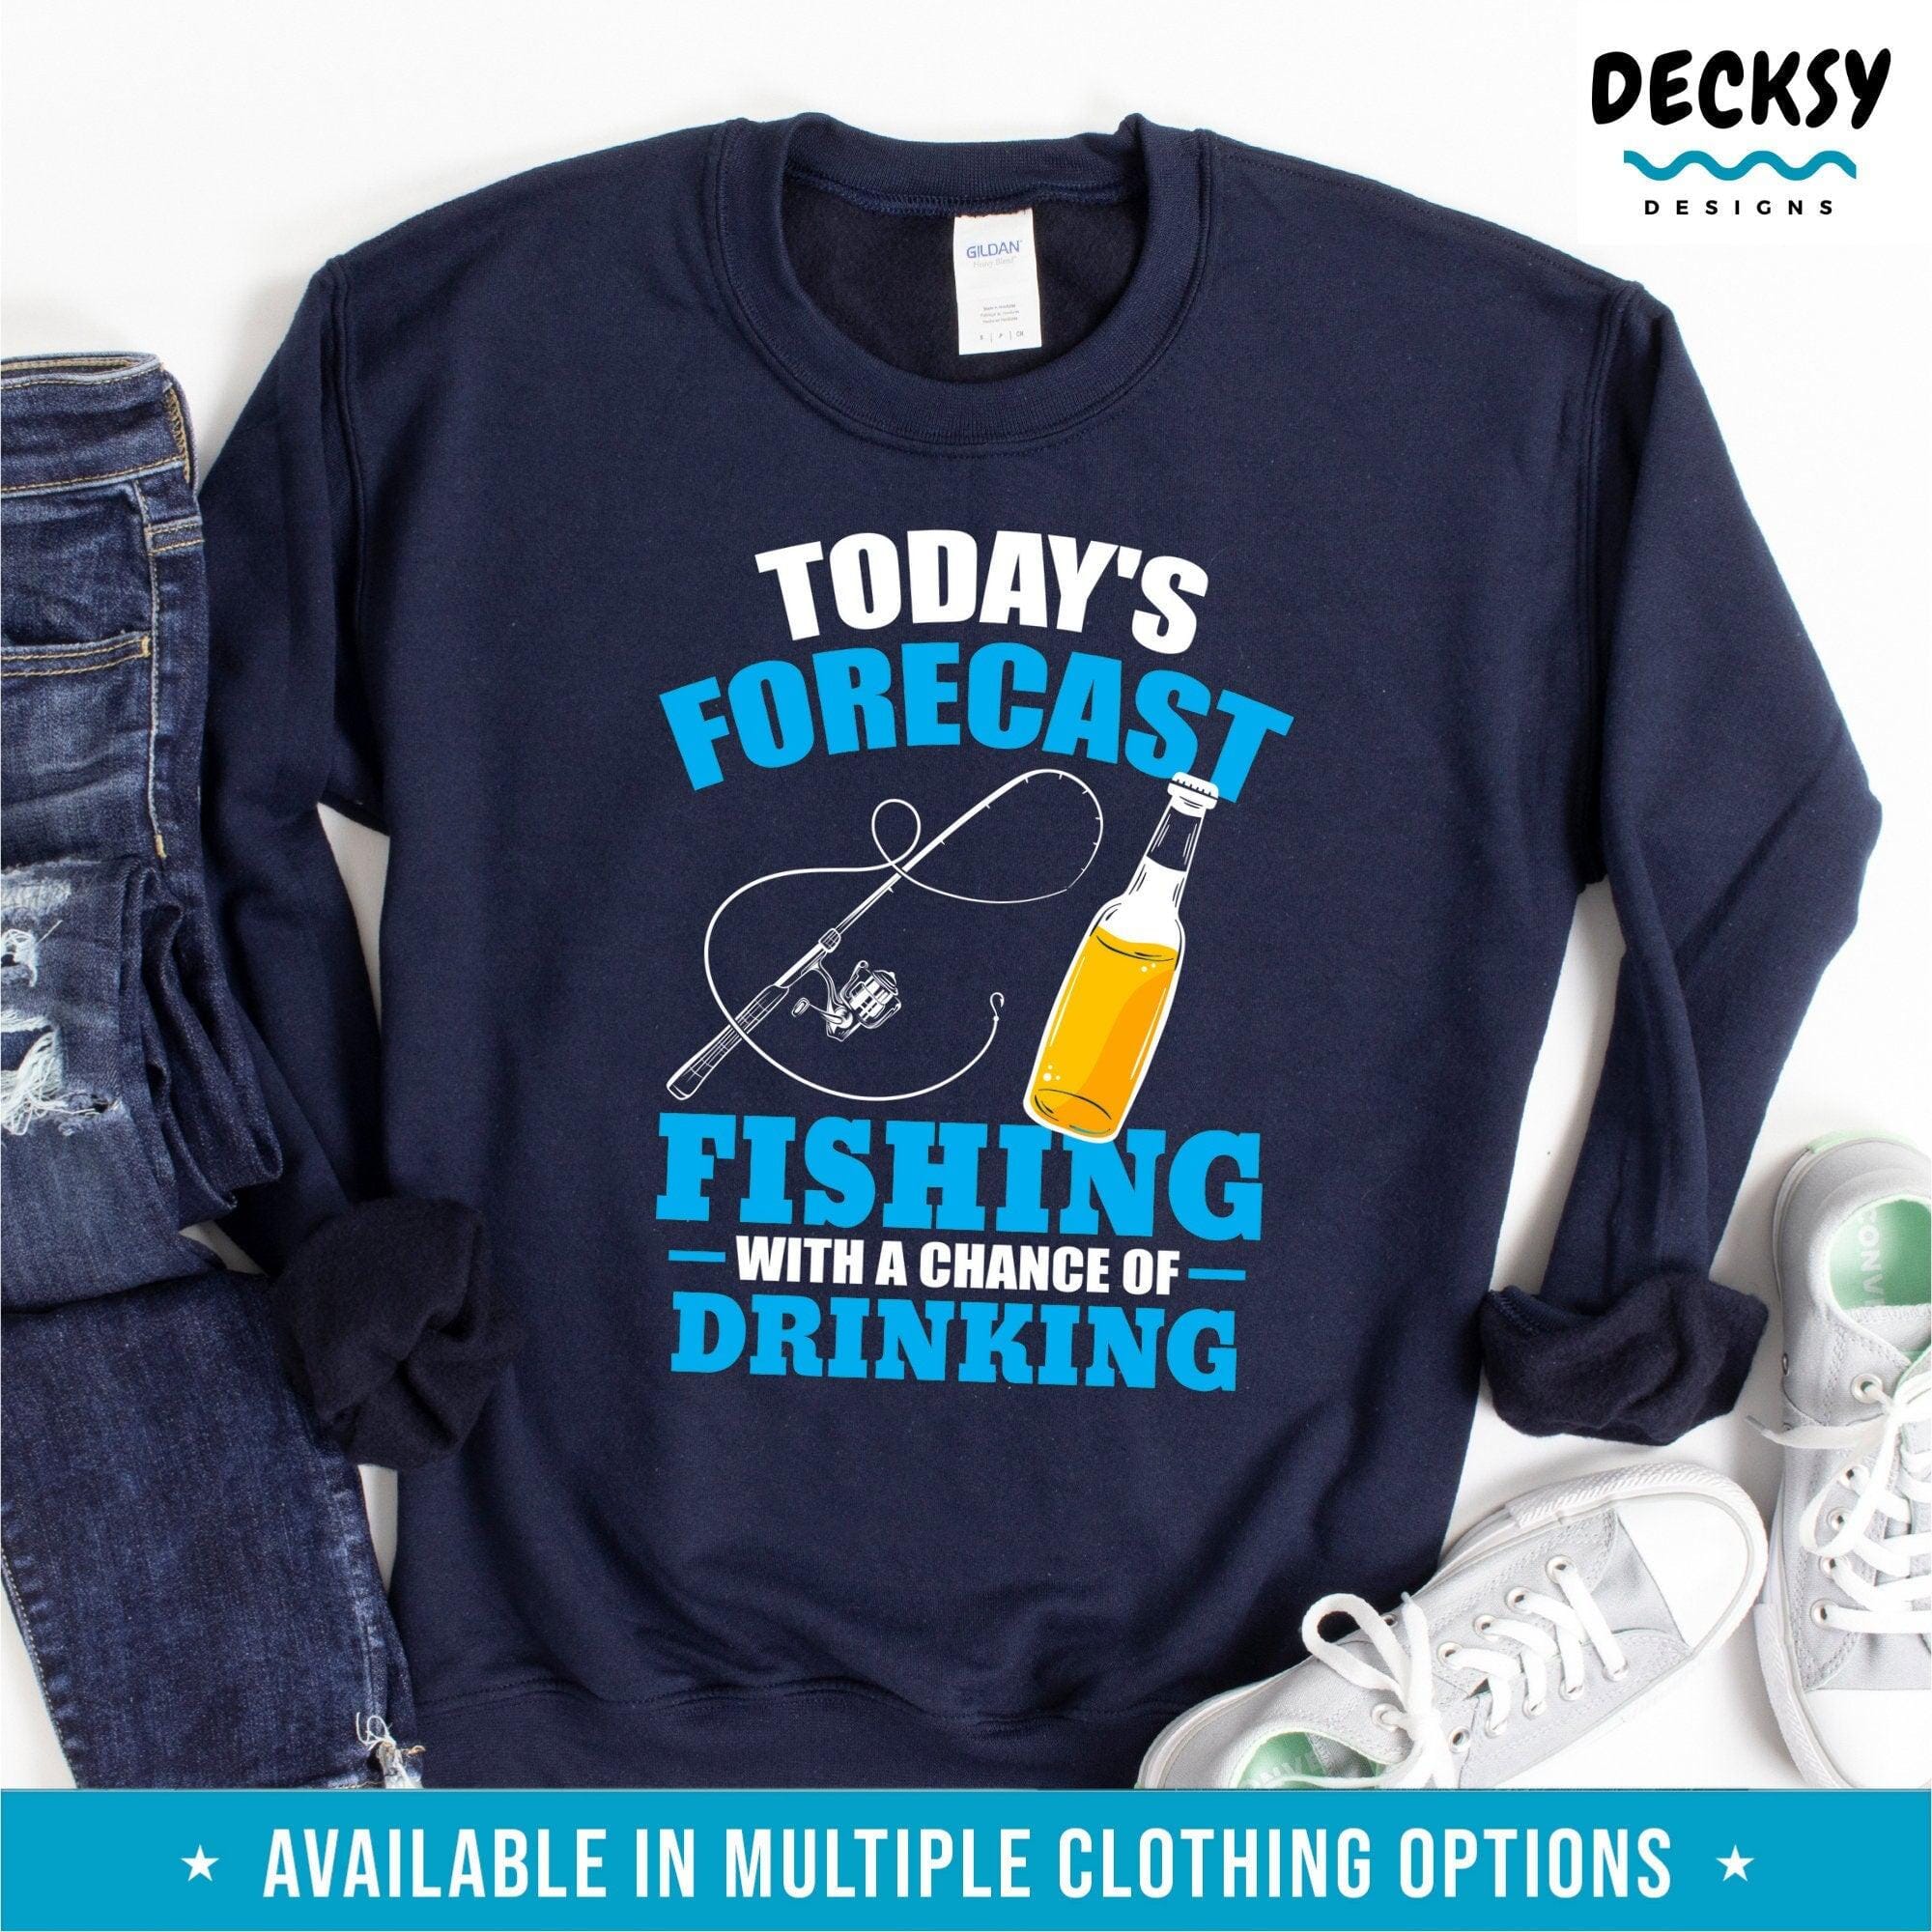 Fishing And Drinking Shirt, Fisherman Gift-Clothing:Gender-Neutral Adult Clothing:Tops & Tees:T-shirts:Graphic Tees-DecksyDesigns